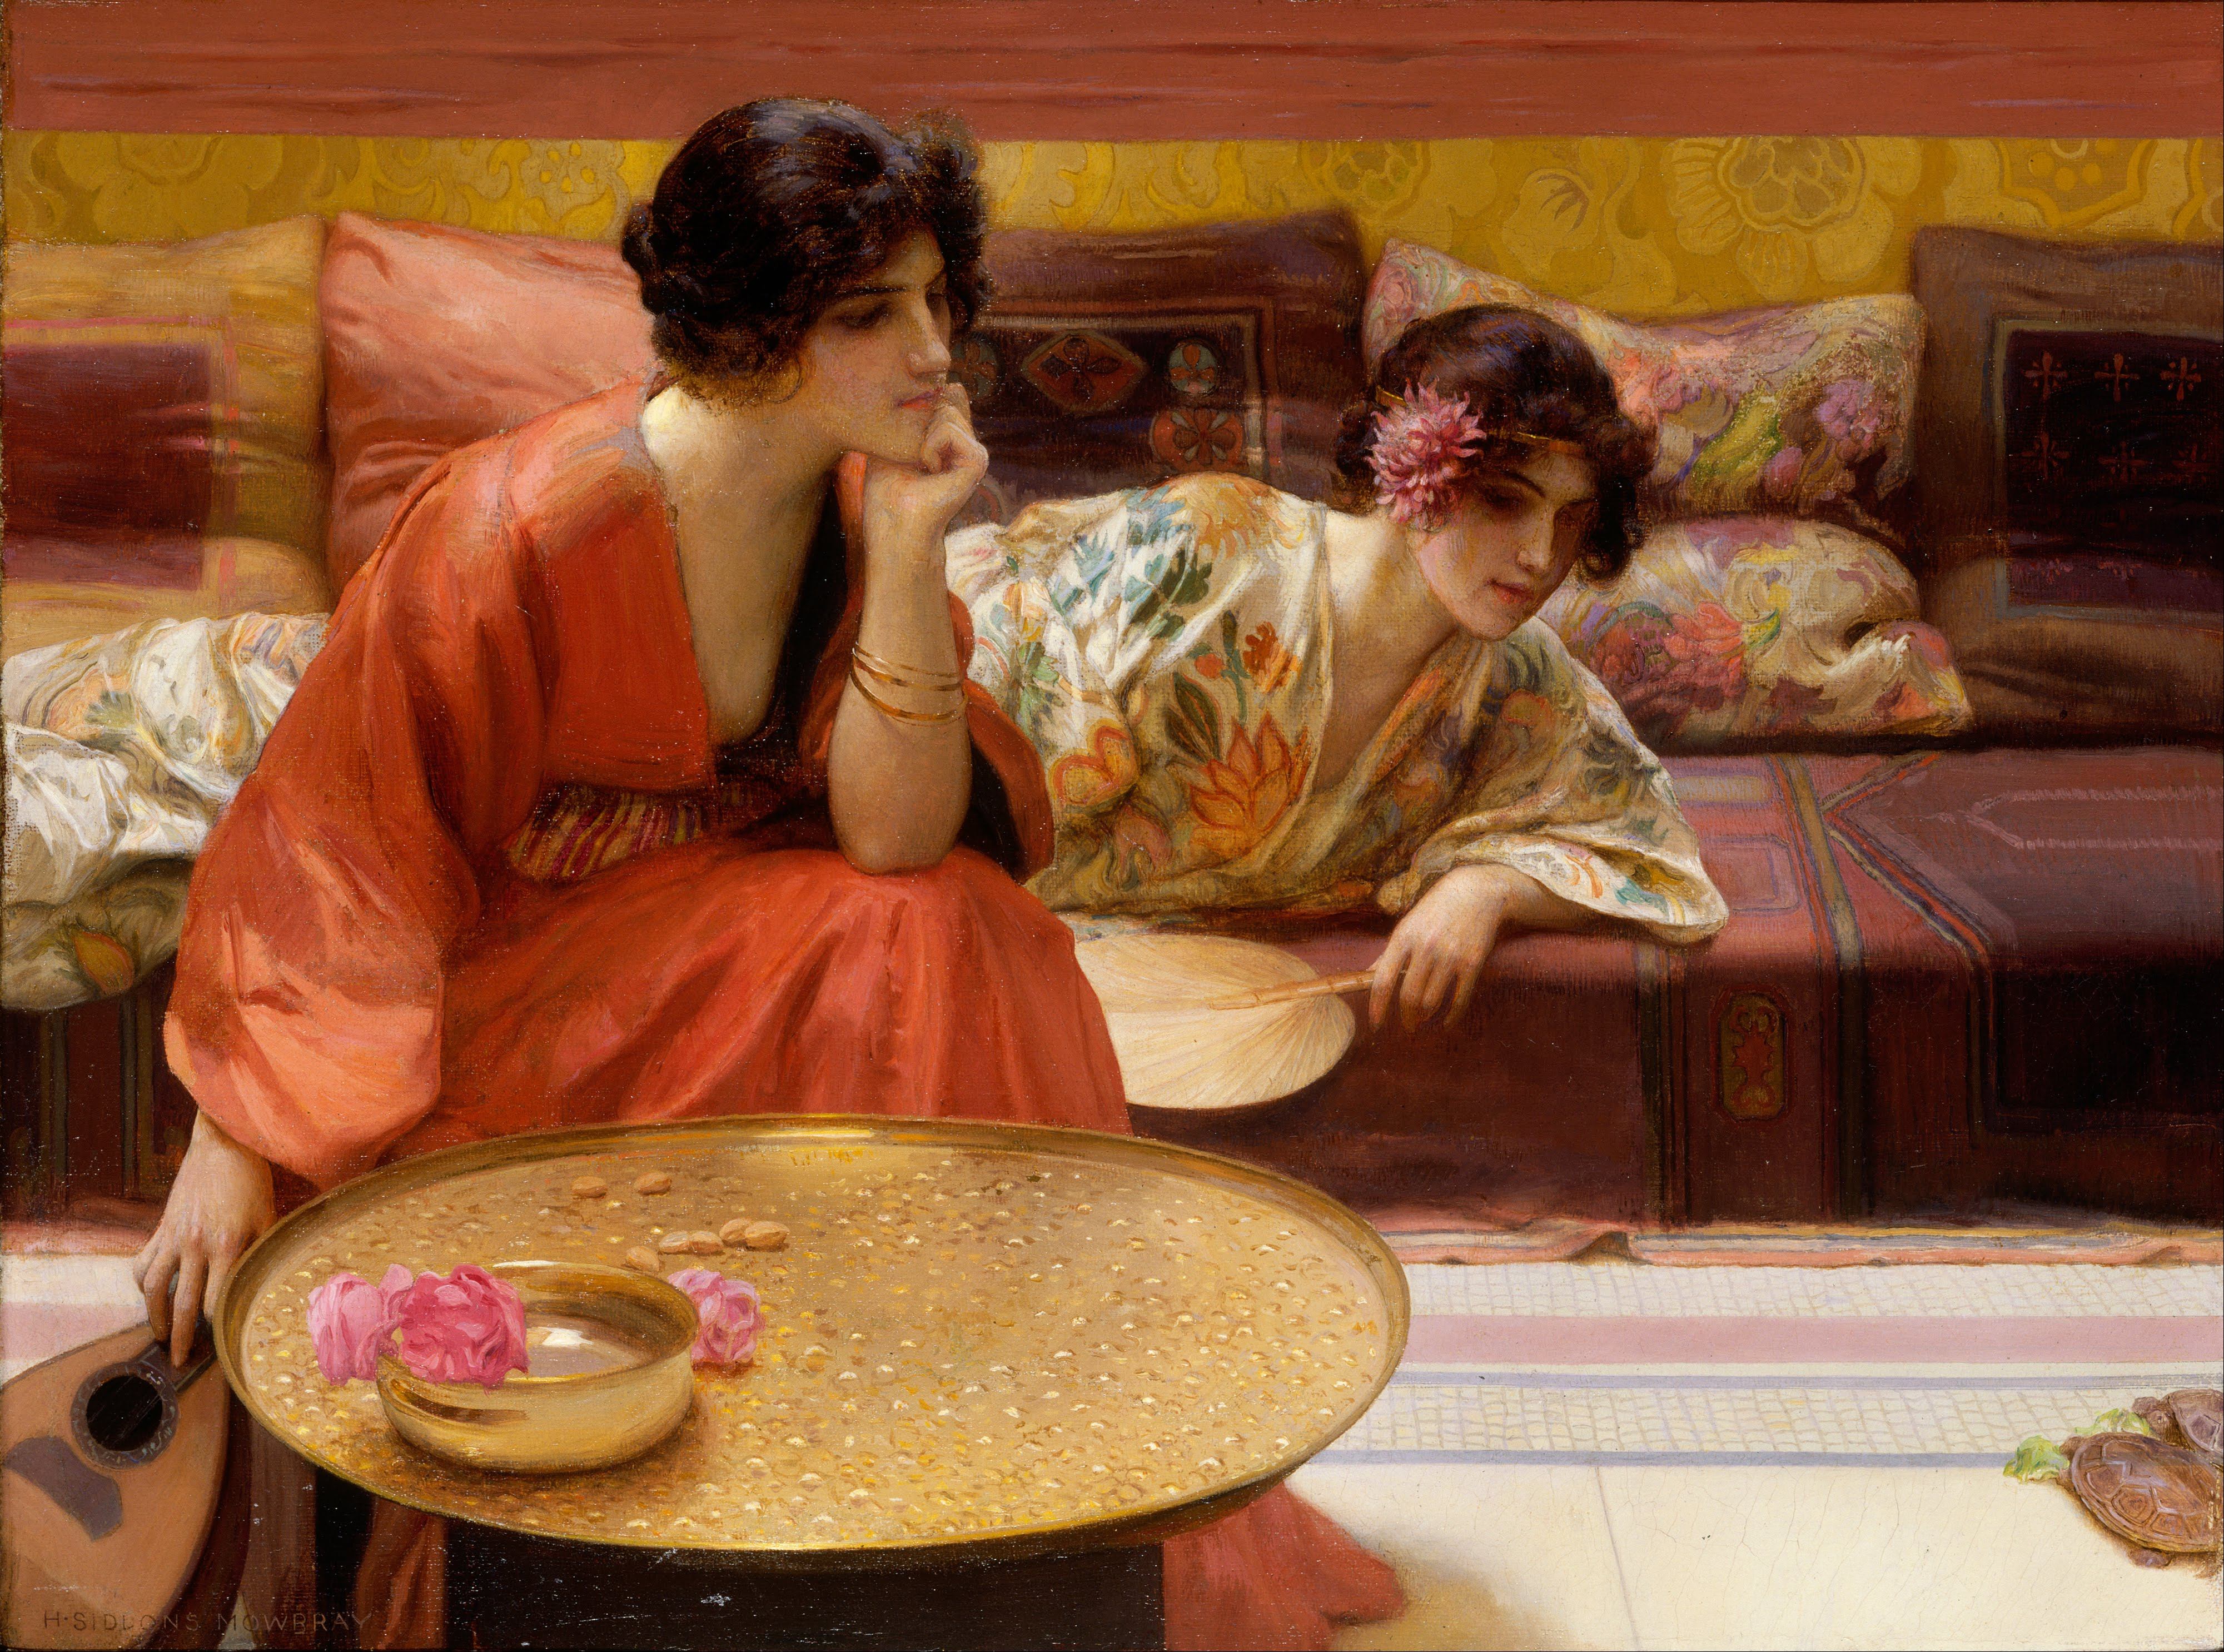 H. Siddons Mowbray - Idle Hours - Google Art Project